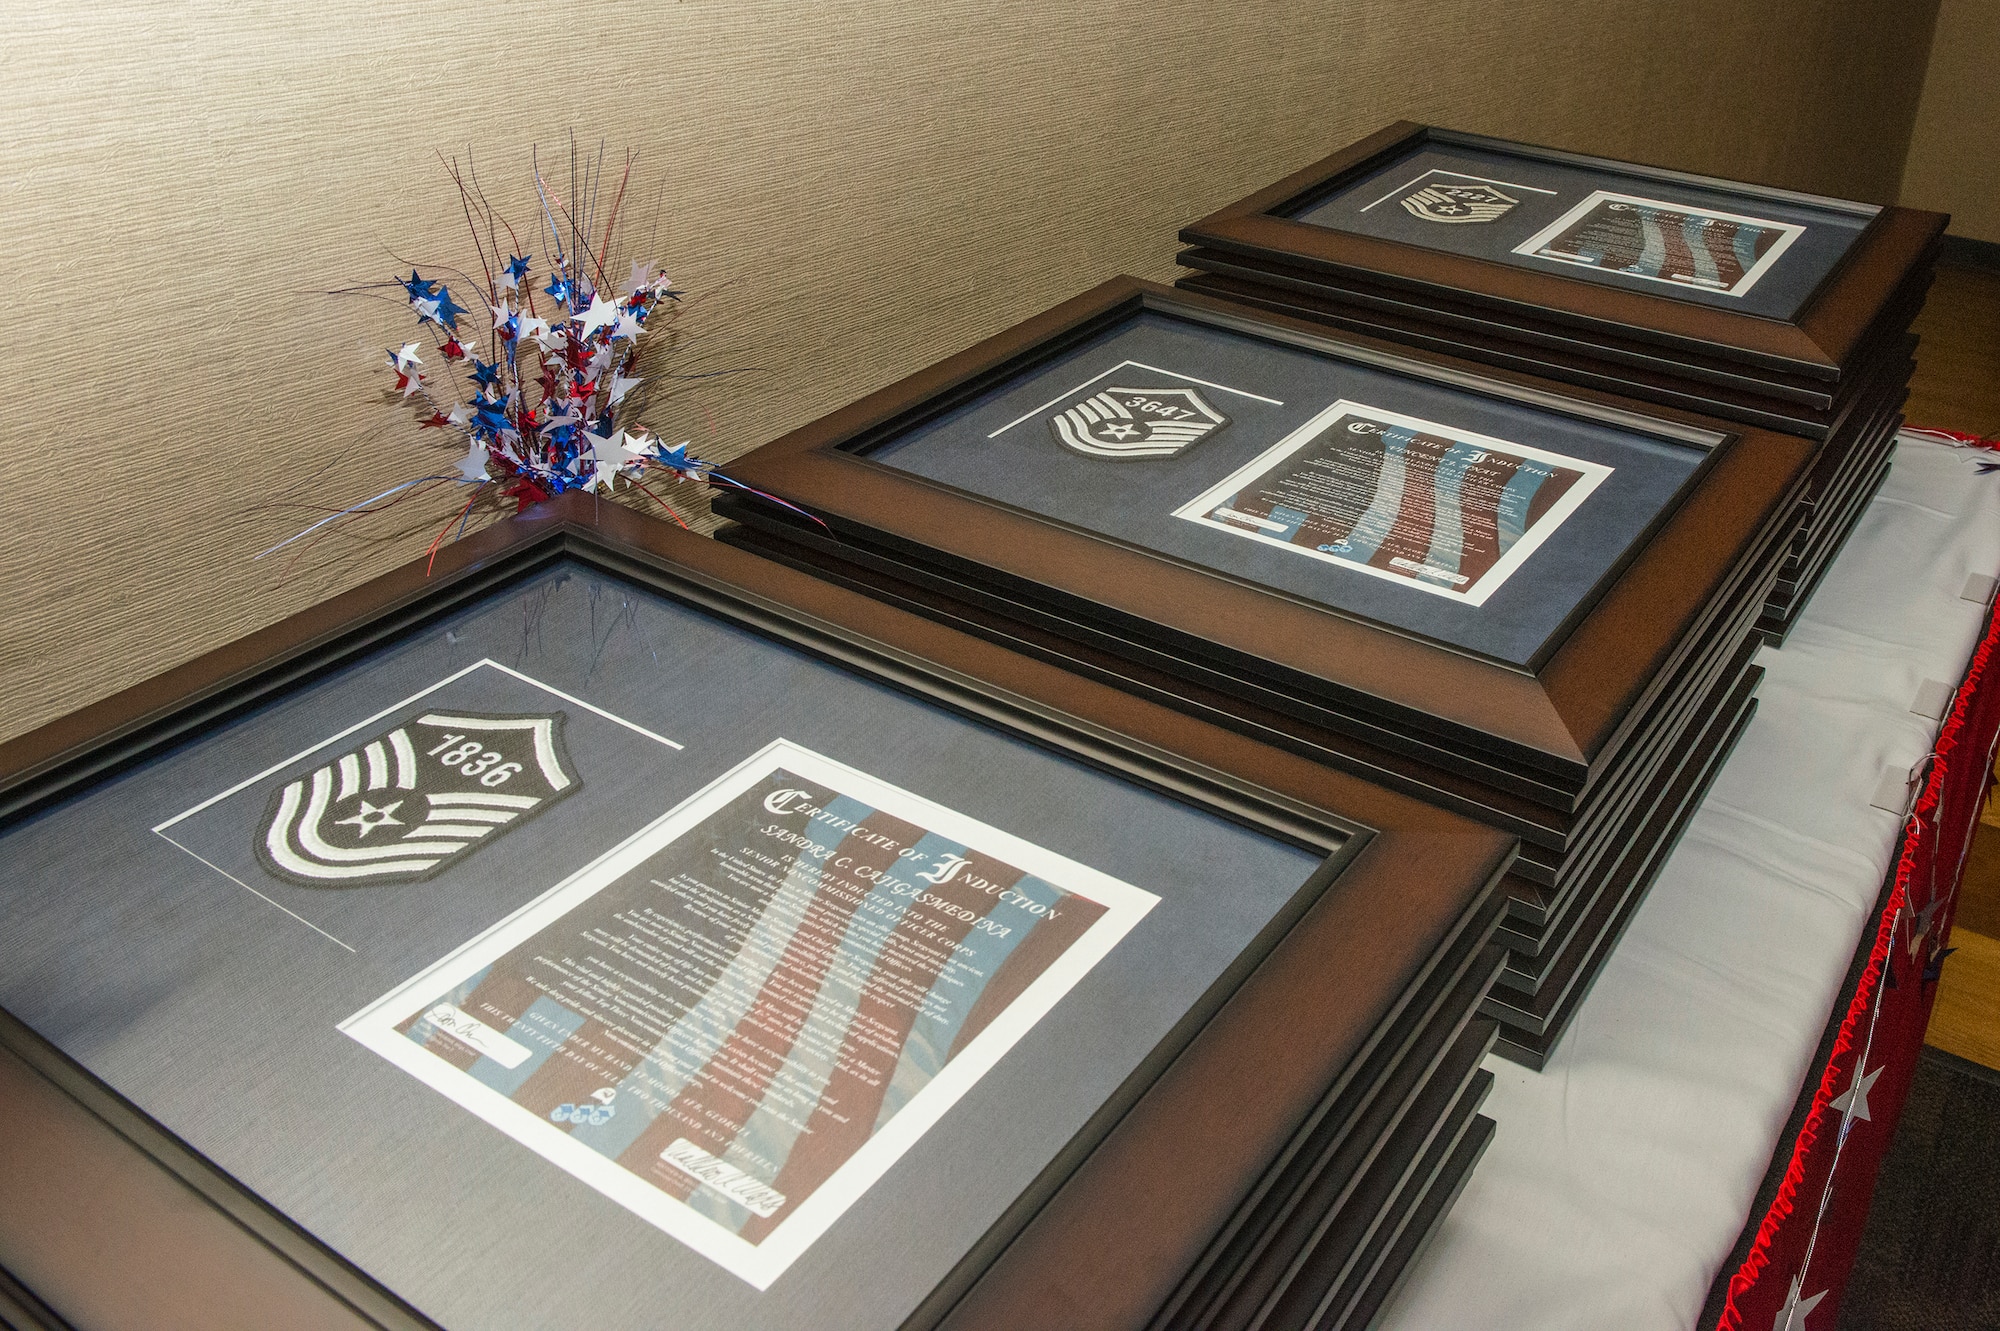 Plaques rest on a table during the senior NCO induction ceremony at Moody Air Force Base, Ga., July 25, 2014. The plaques were awarded to the inductees and included their line number long with a certificate of induction into the senior NCO tier. (U.S. Air Force photo by Airman 1st Class Ceaira Tinsley/Released)